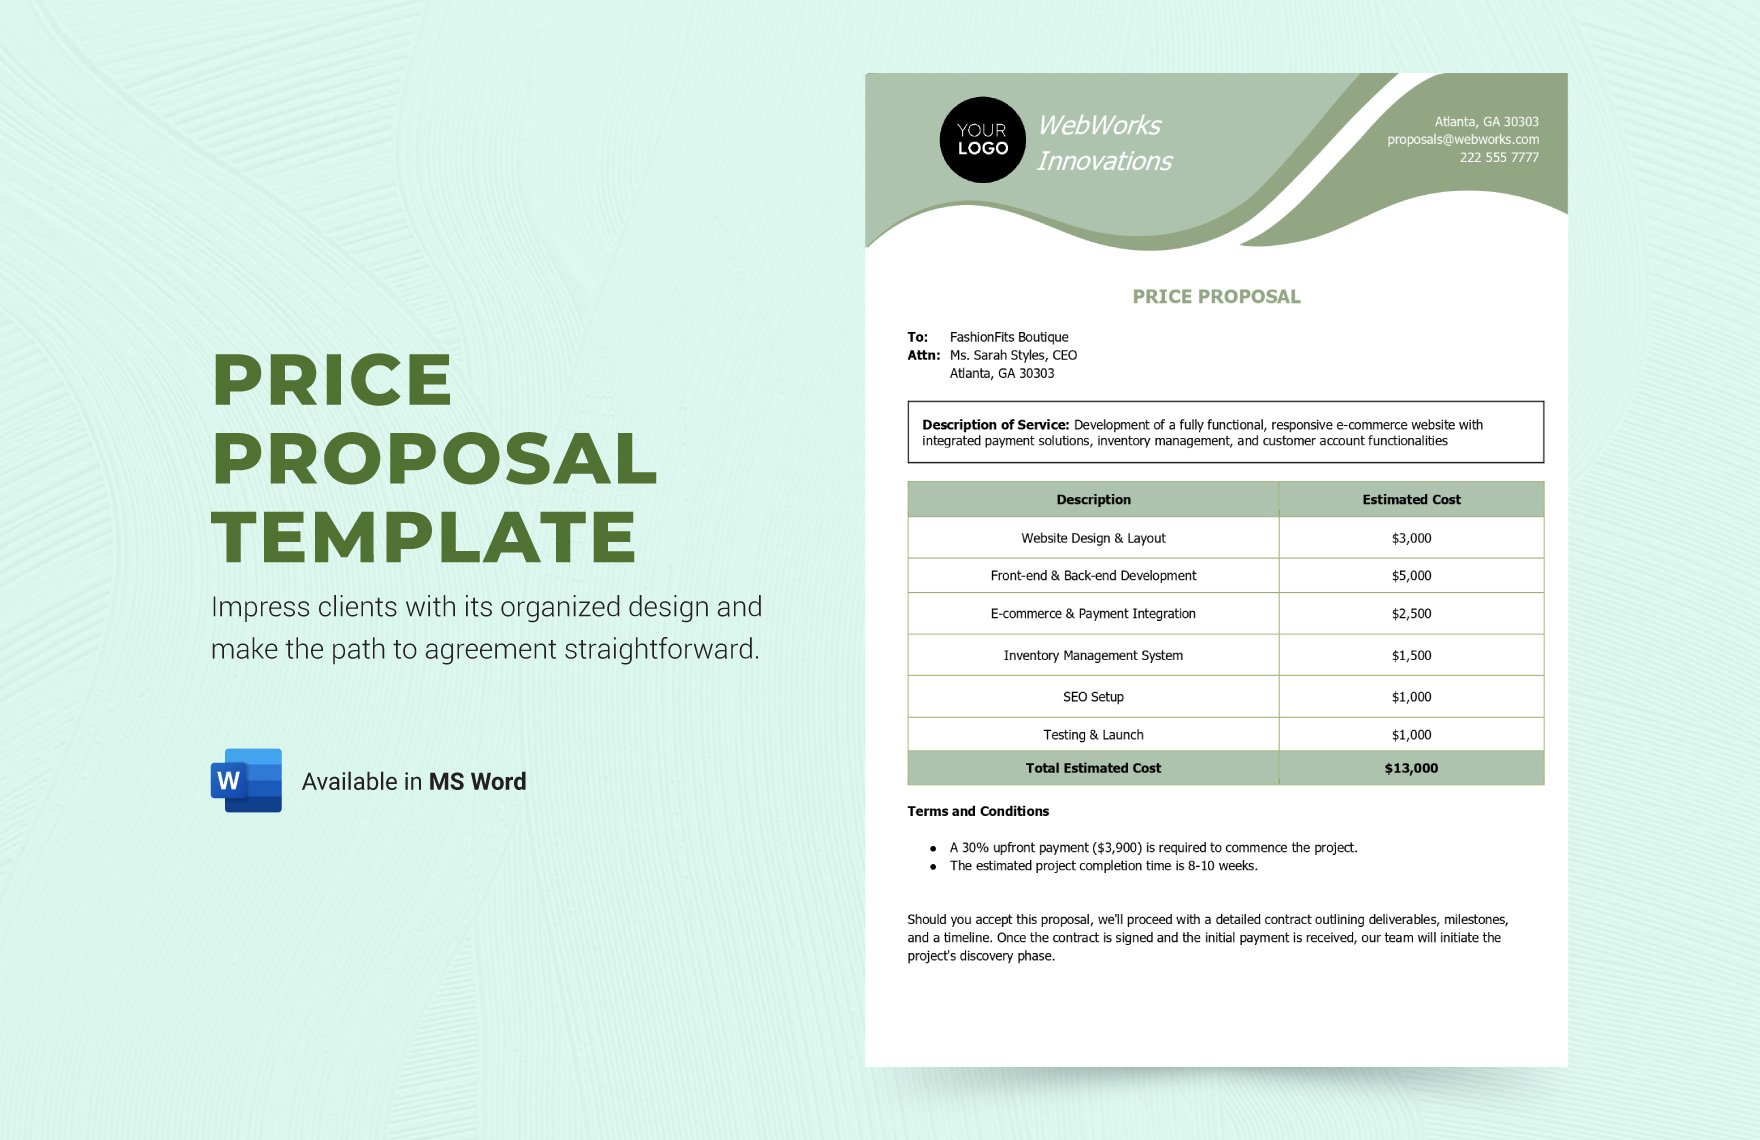 Price Proposal Template